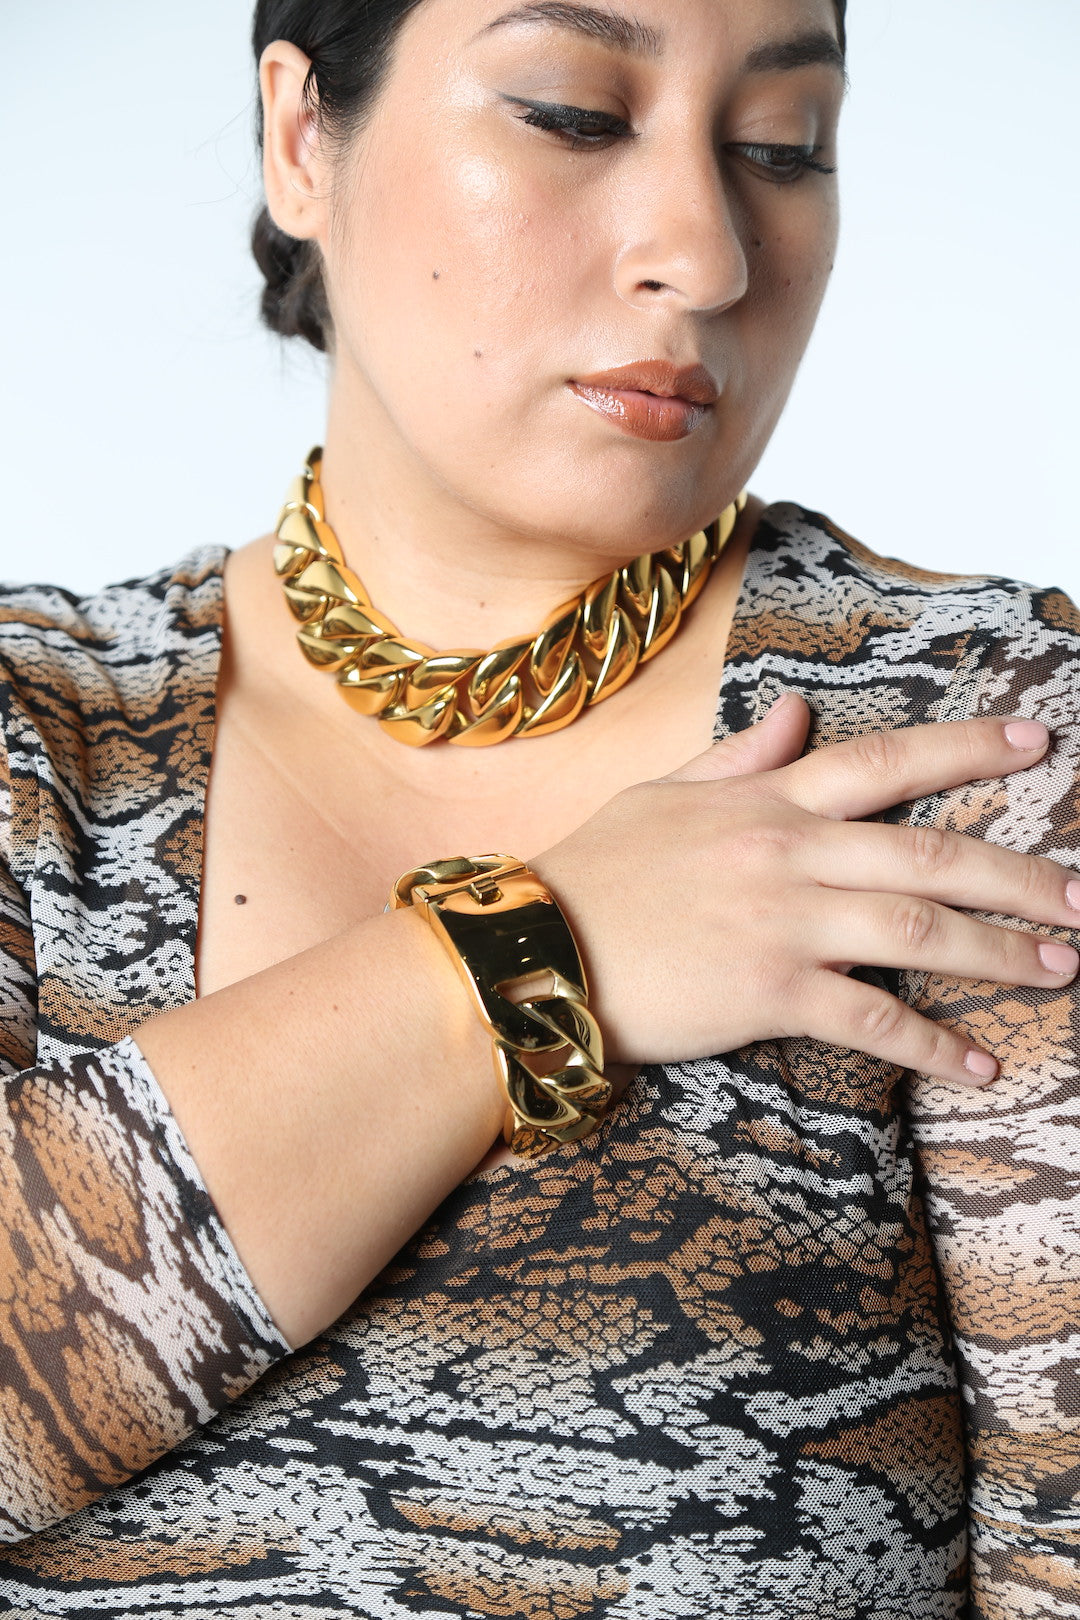 Bold Chains Gold-Tone Stainless Steel Chain Necklace